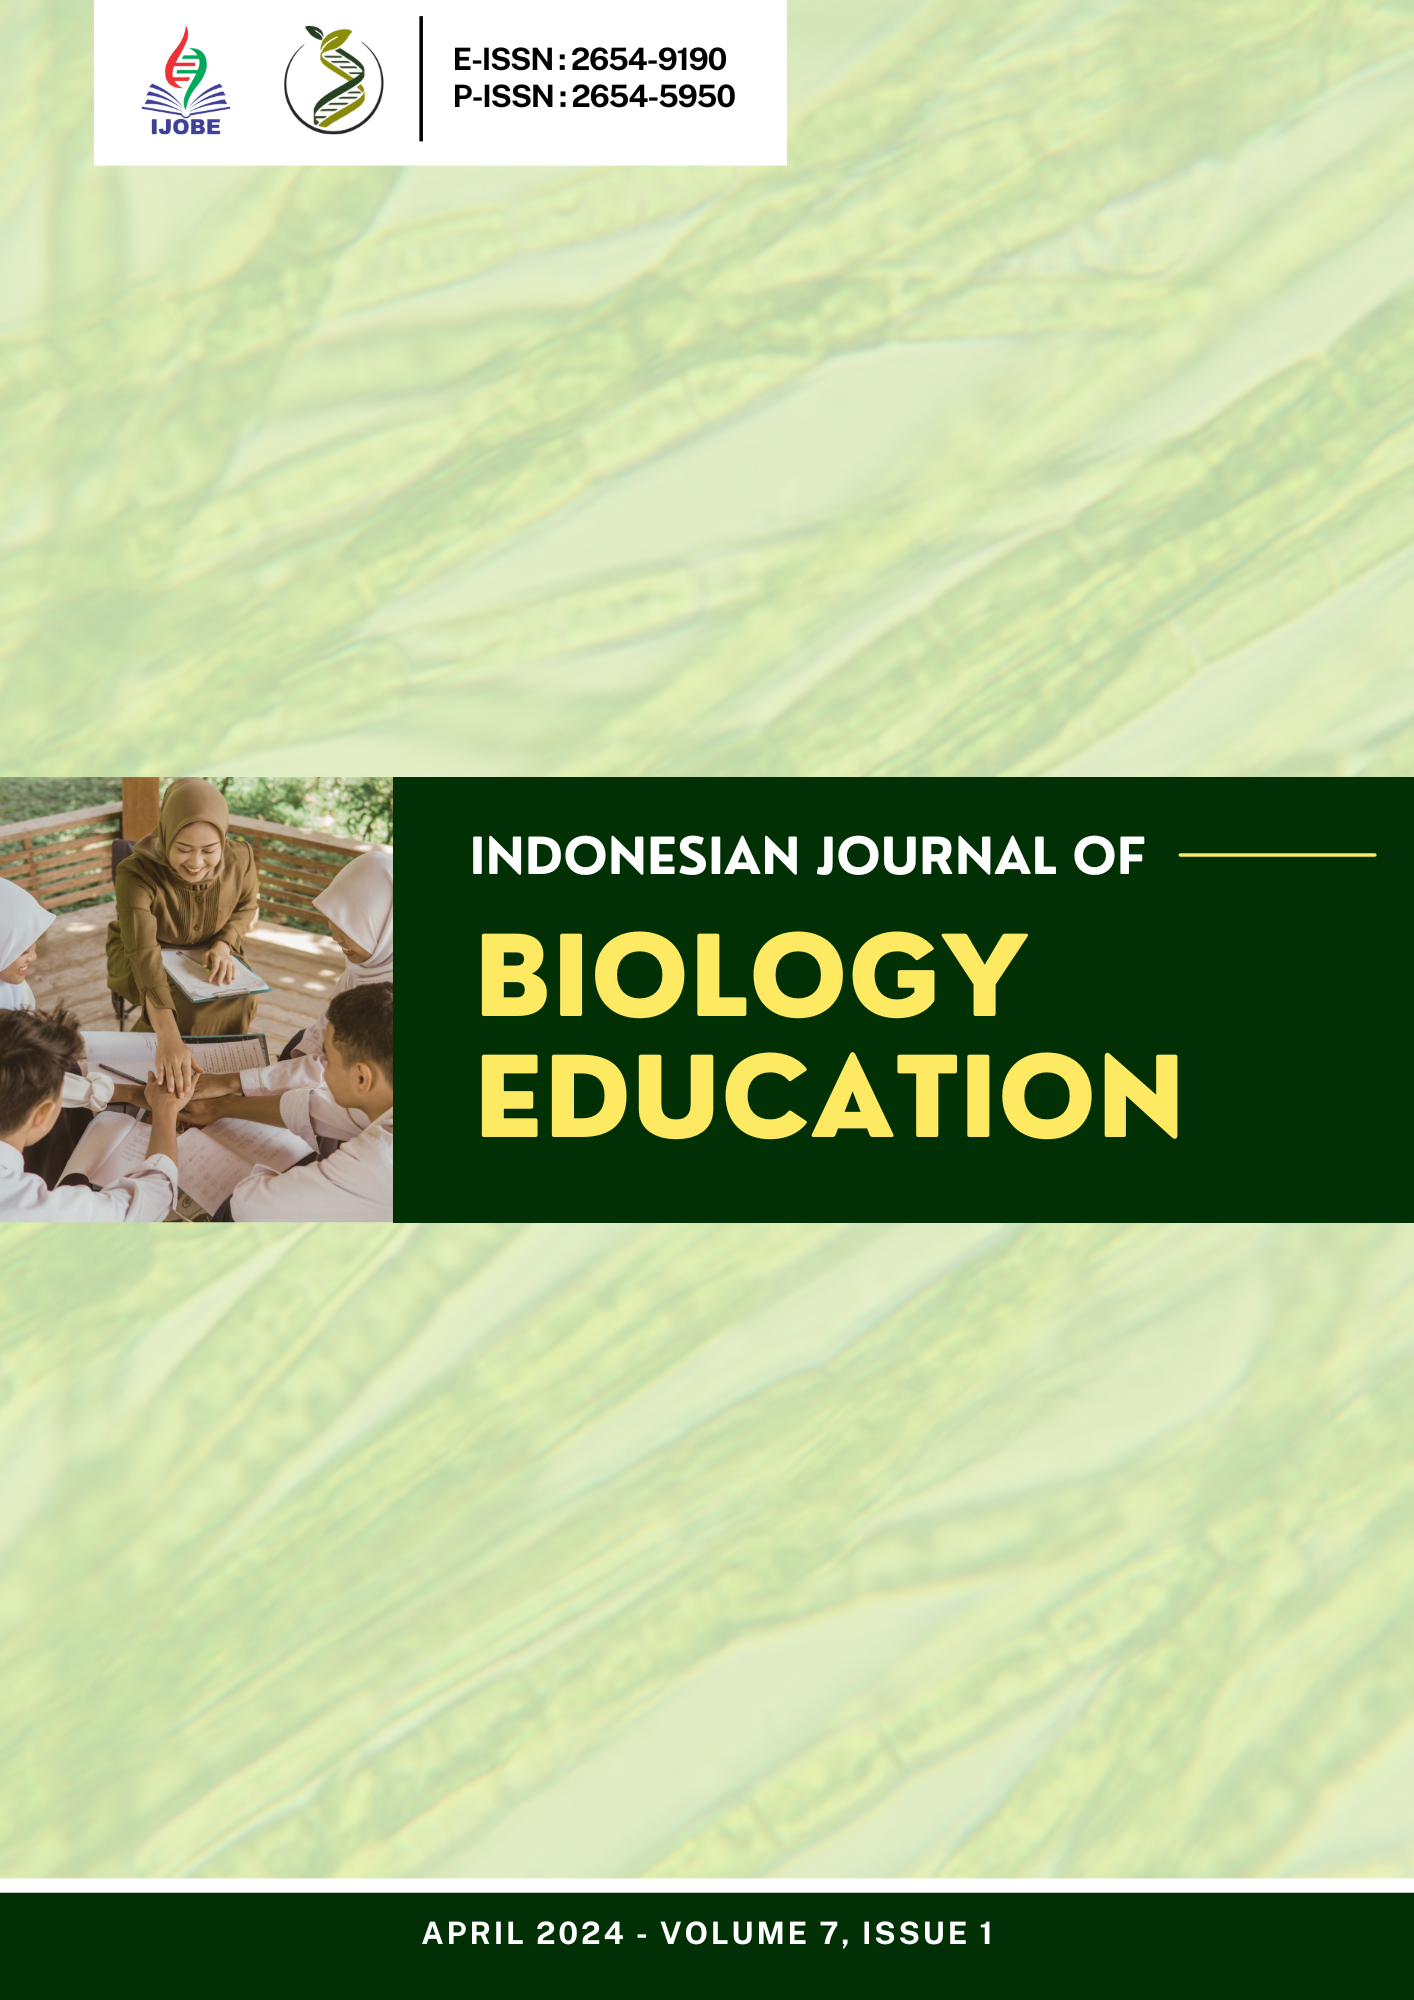 					View Vol. 7 No. 1 (2024): INDONESIAN JOURNAL OF BIOLOGY EDUCATION
				